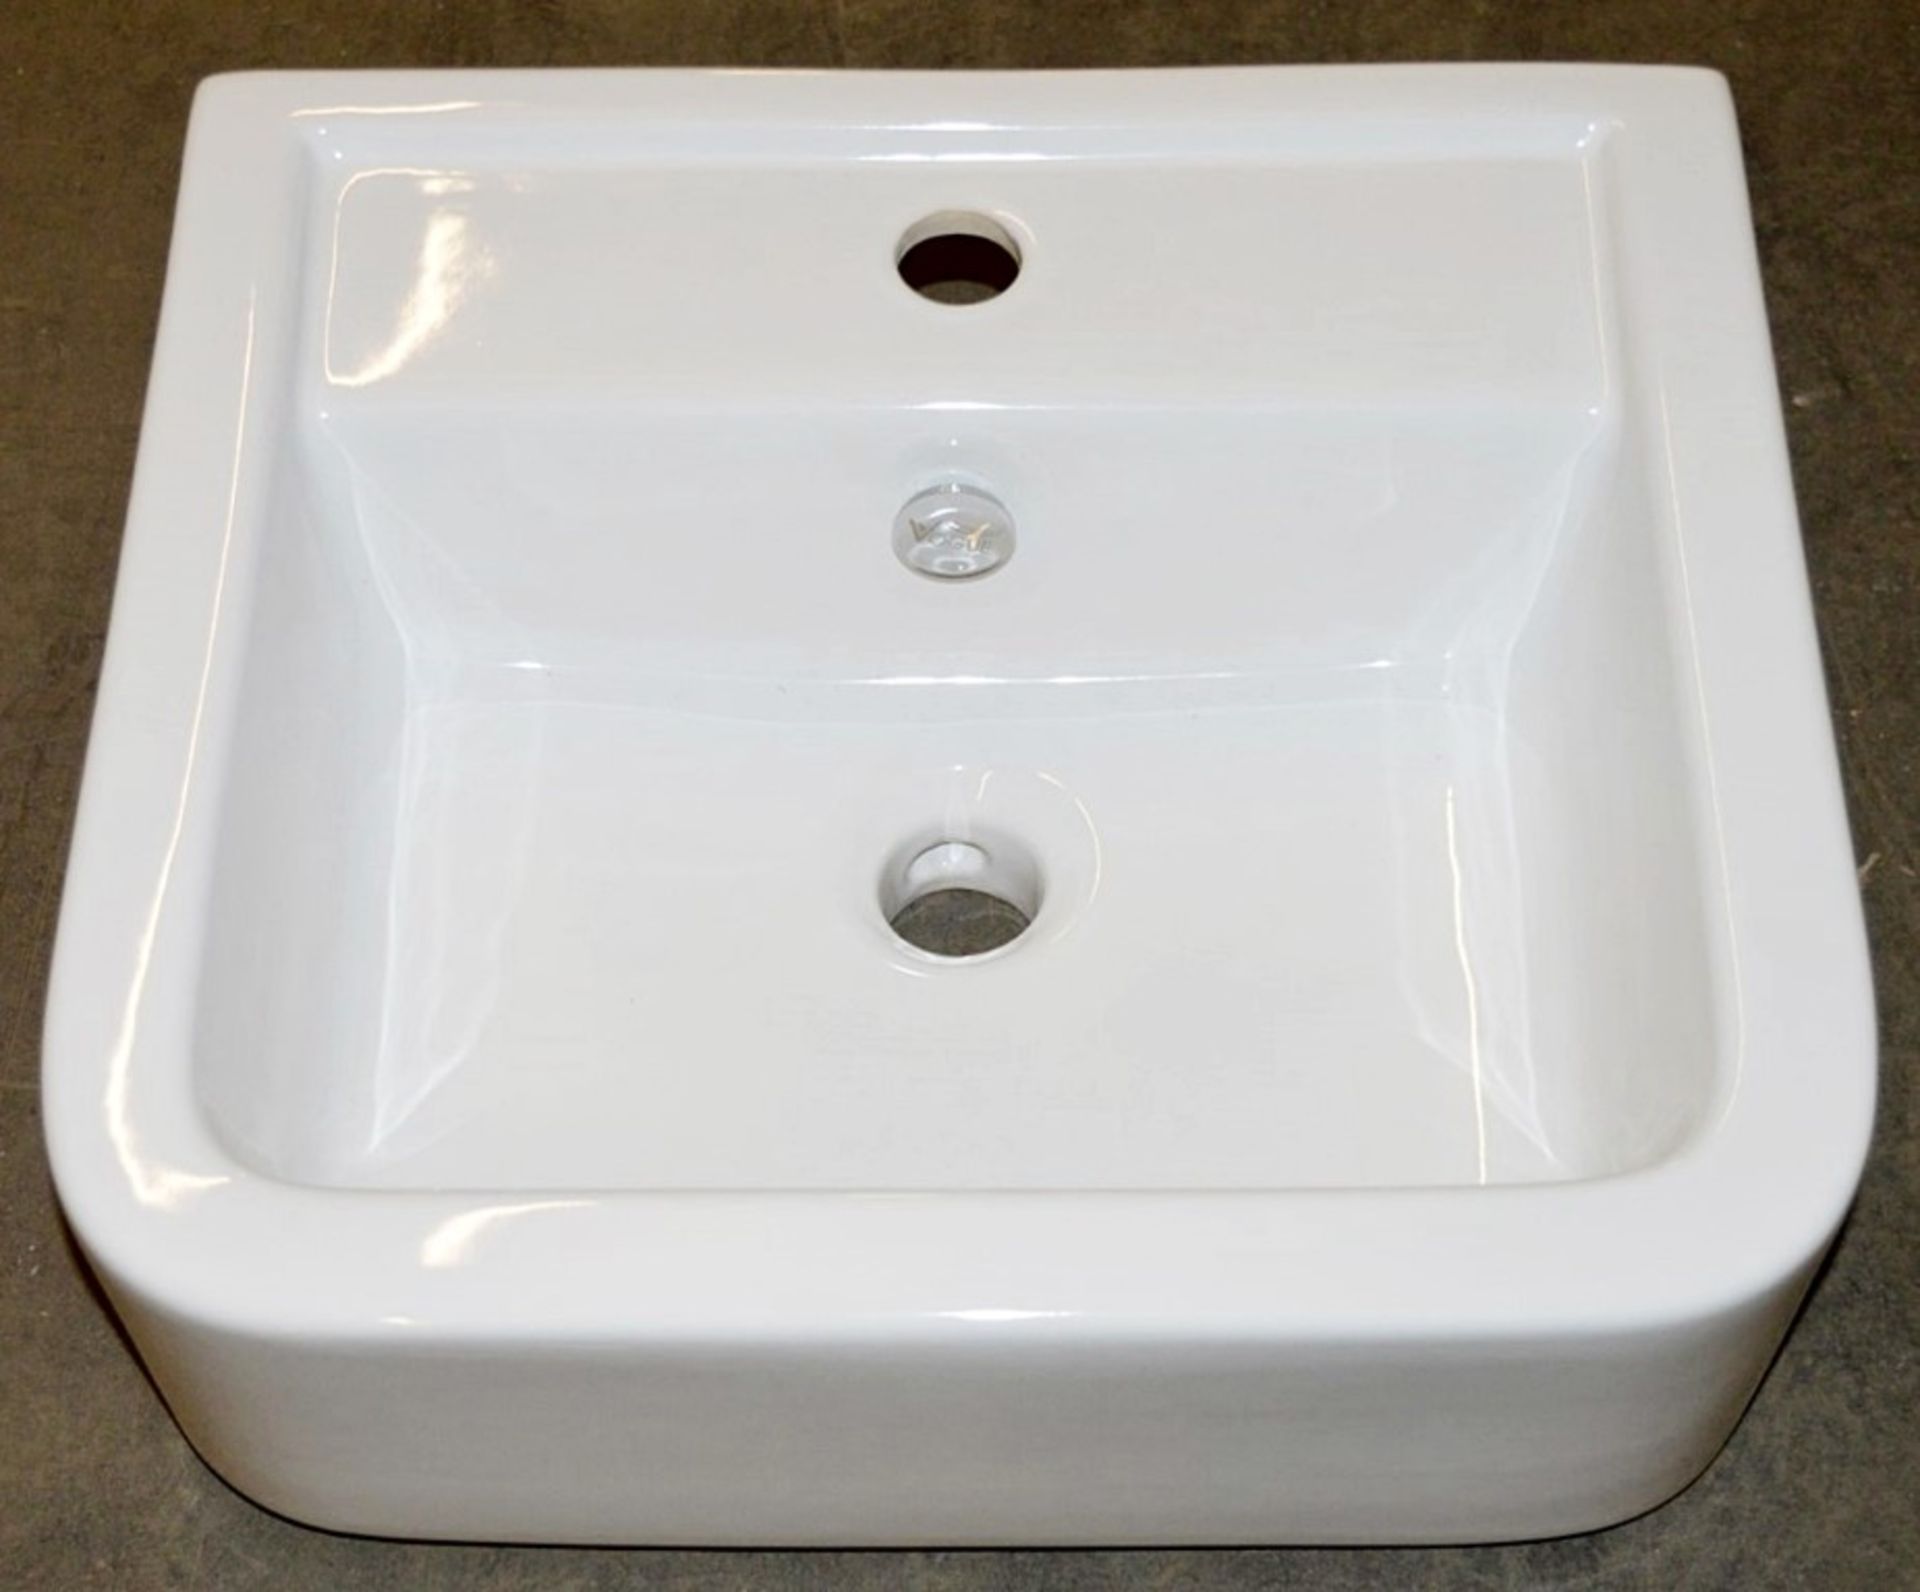 10 x Vogue Bathrooms OPTIONS Single Tap Hole SEMI RECESSED SINK BASINS - 450mm Width - Brand New - Image 4 of 5